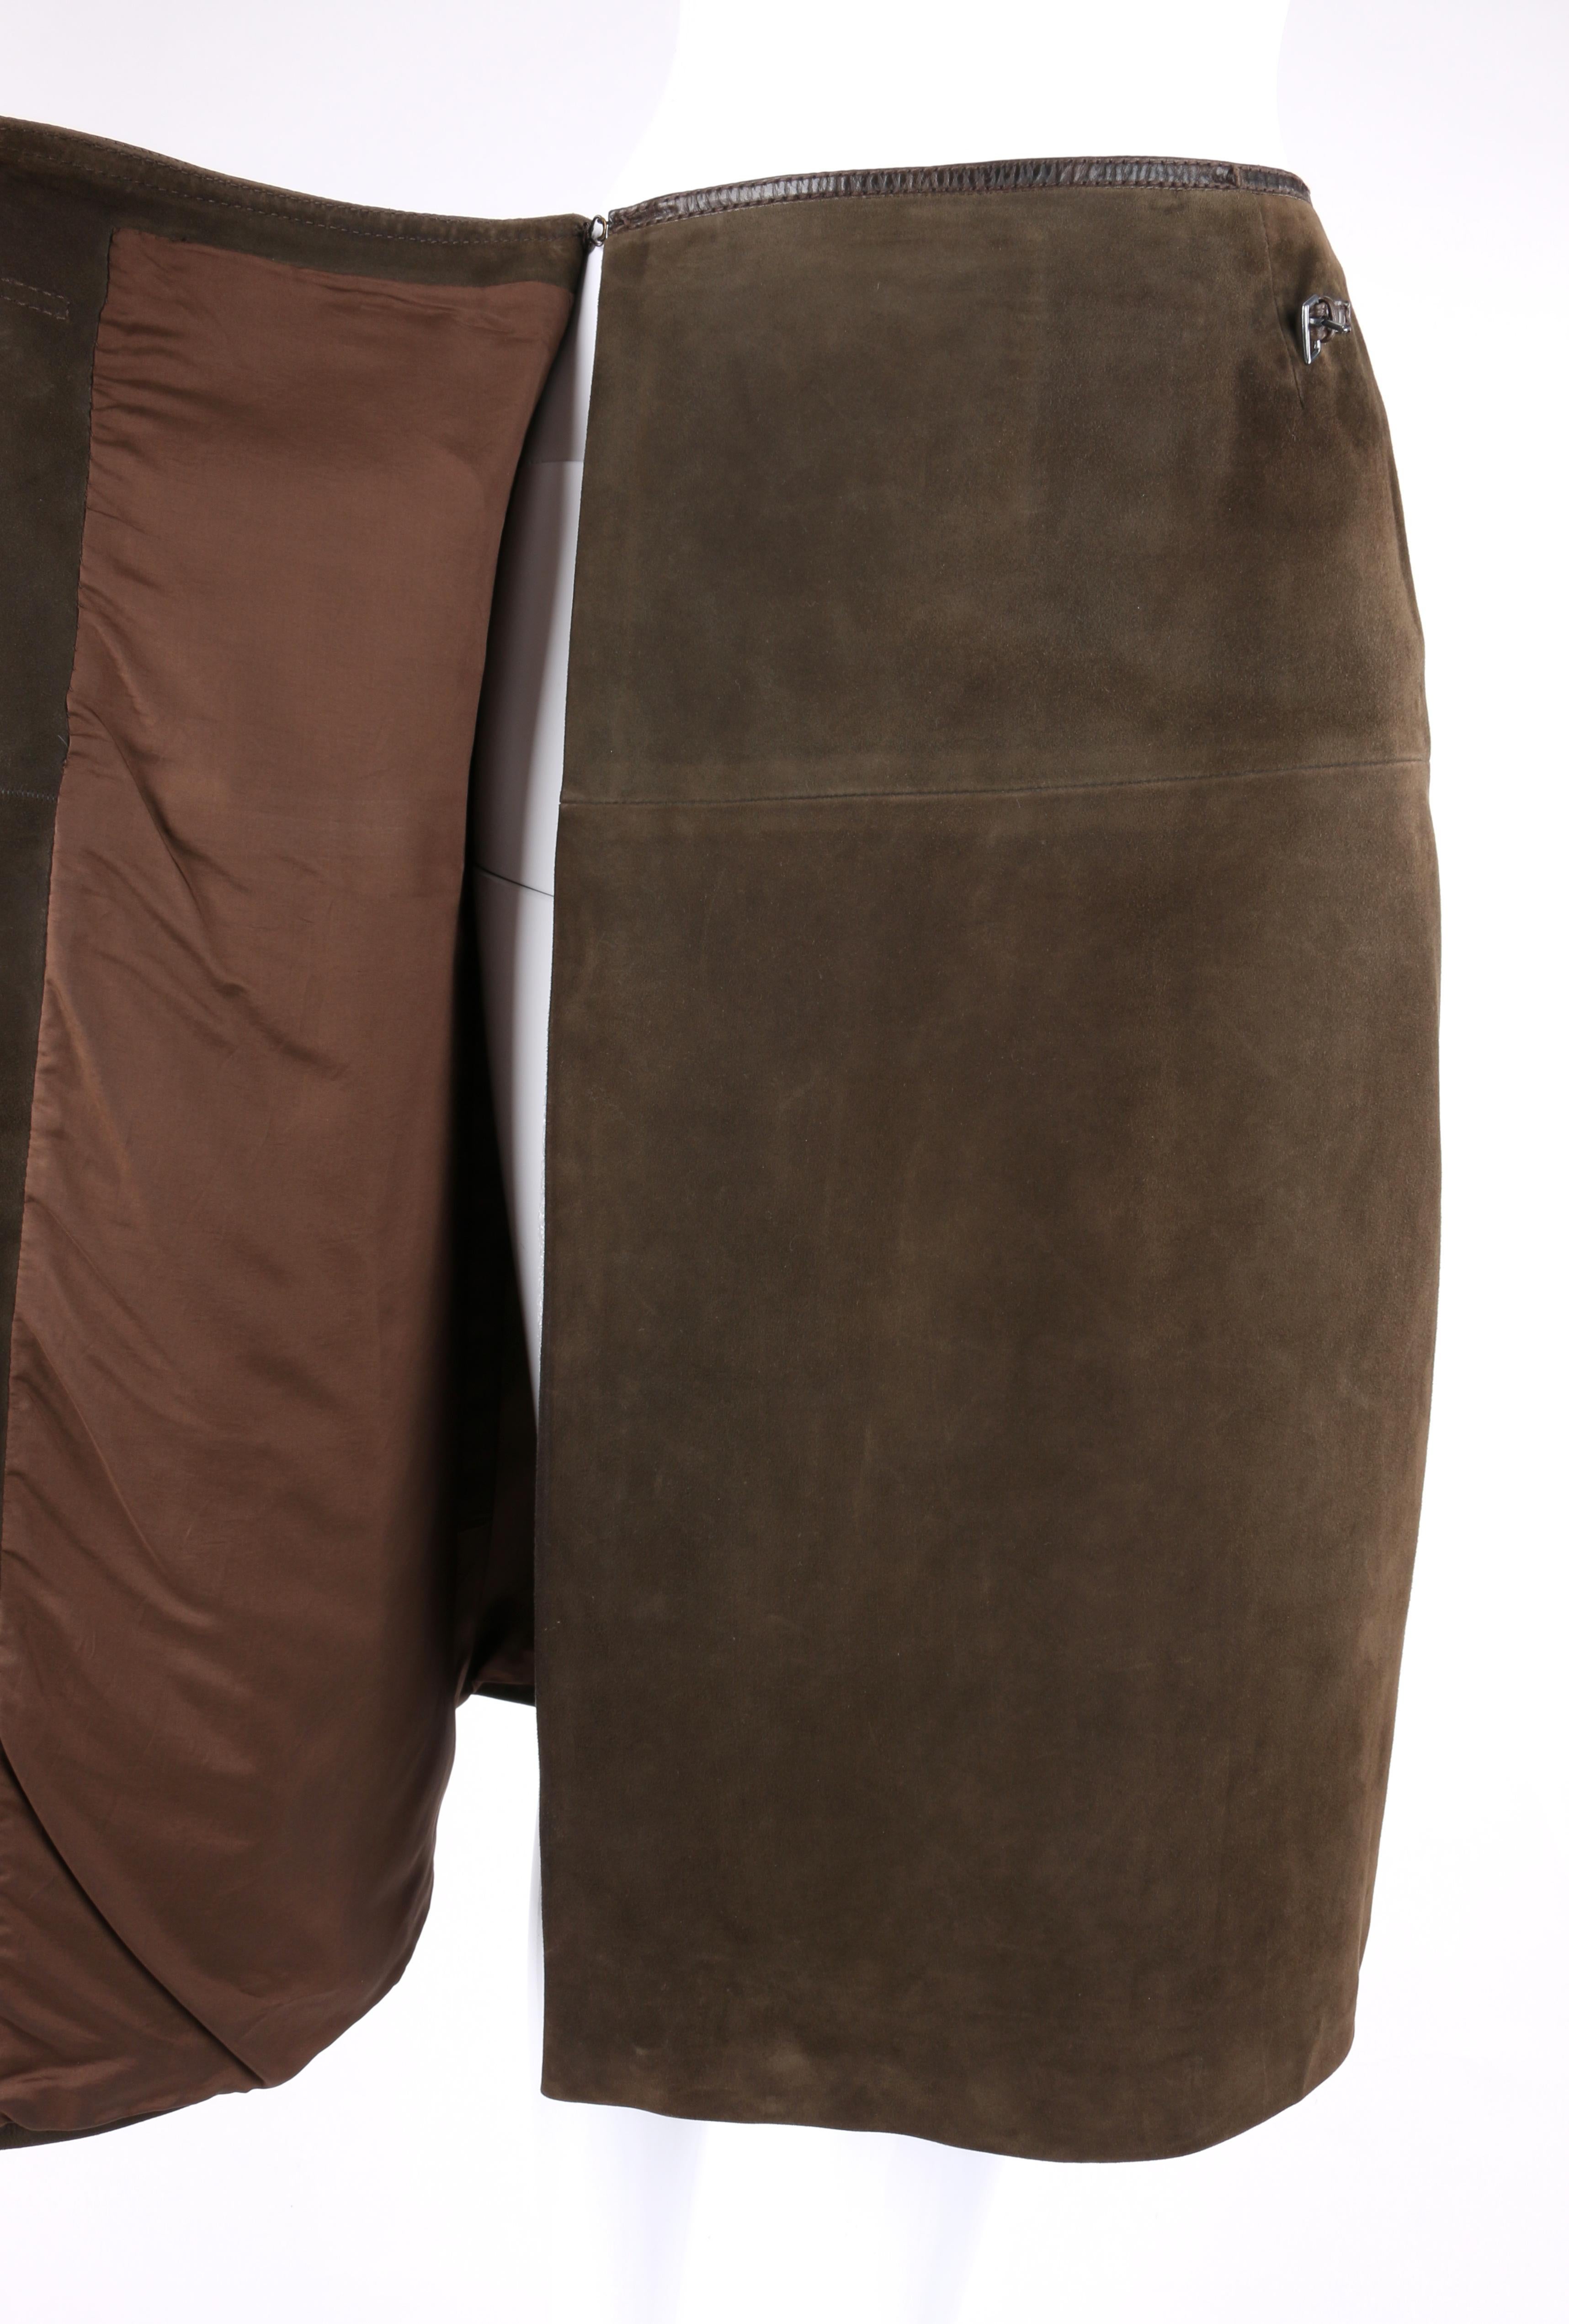 Black HERMES Sport c.1970's Brown Suede Classic Leather Wrap Skirt